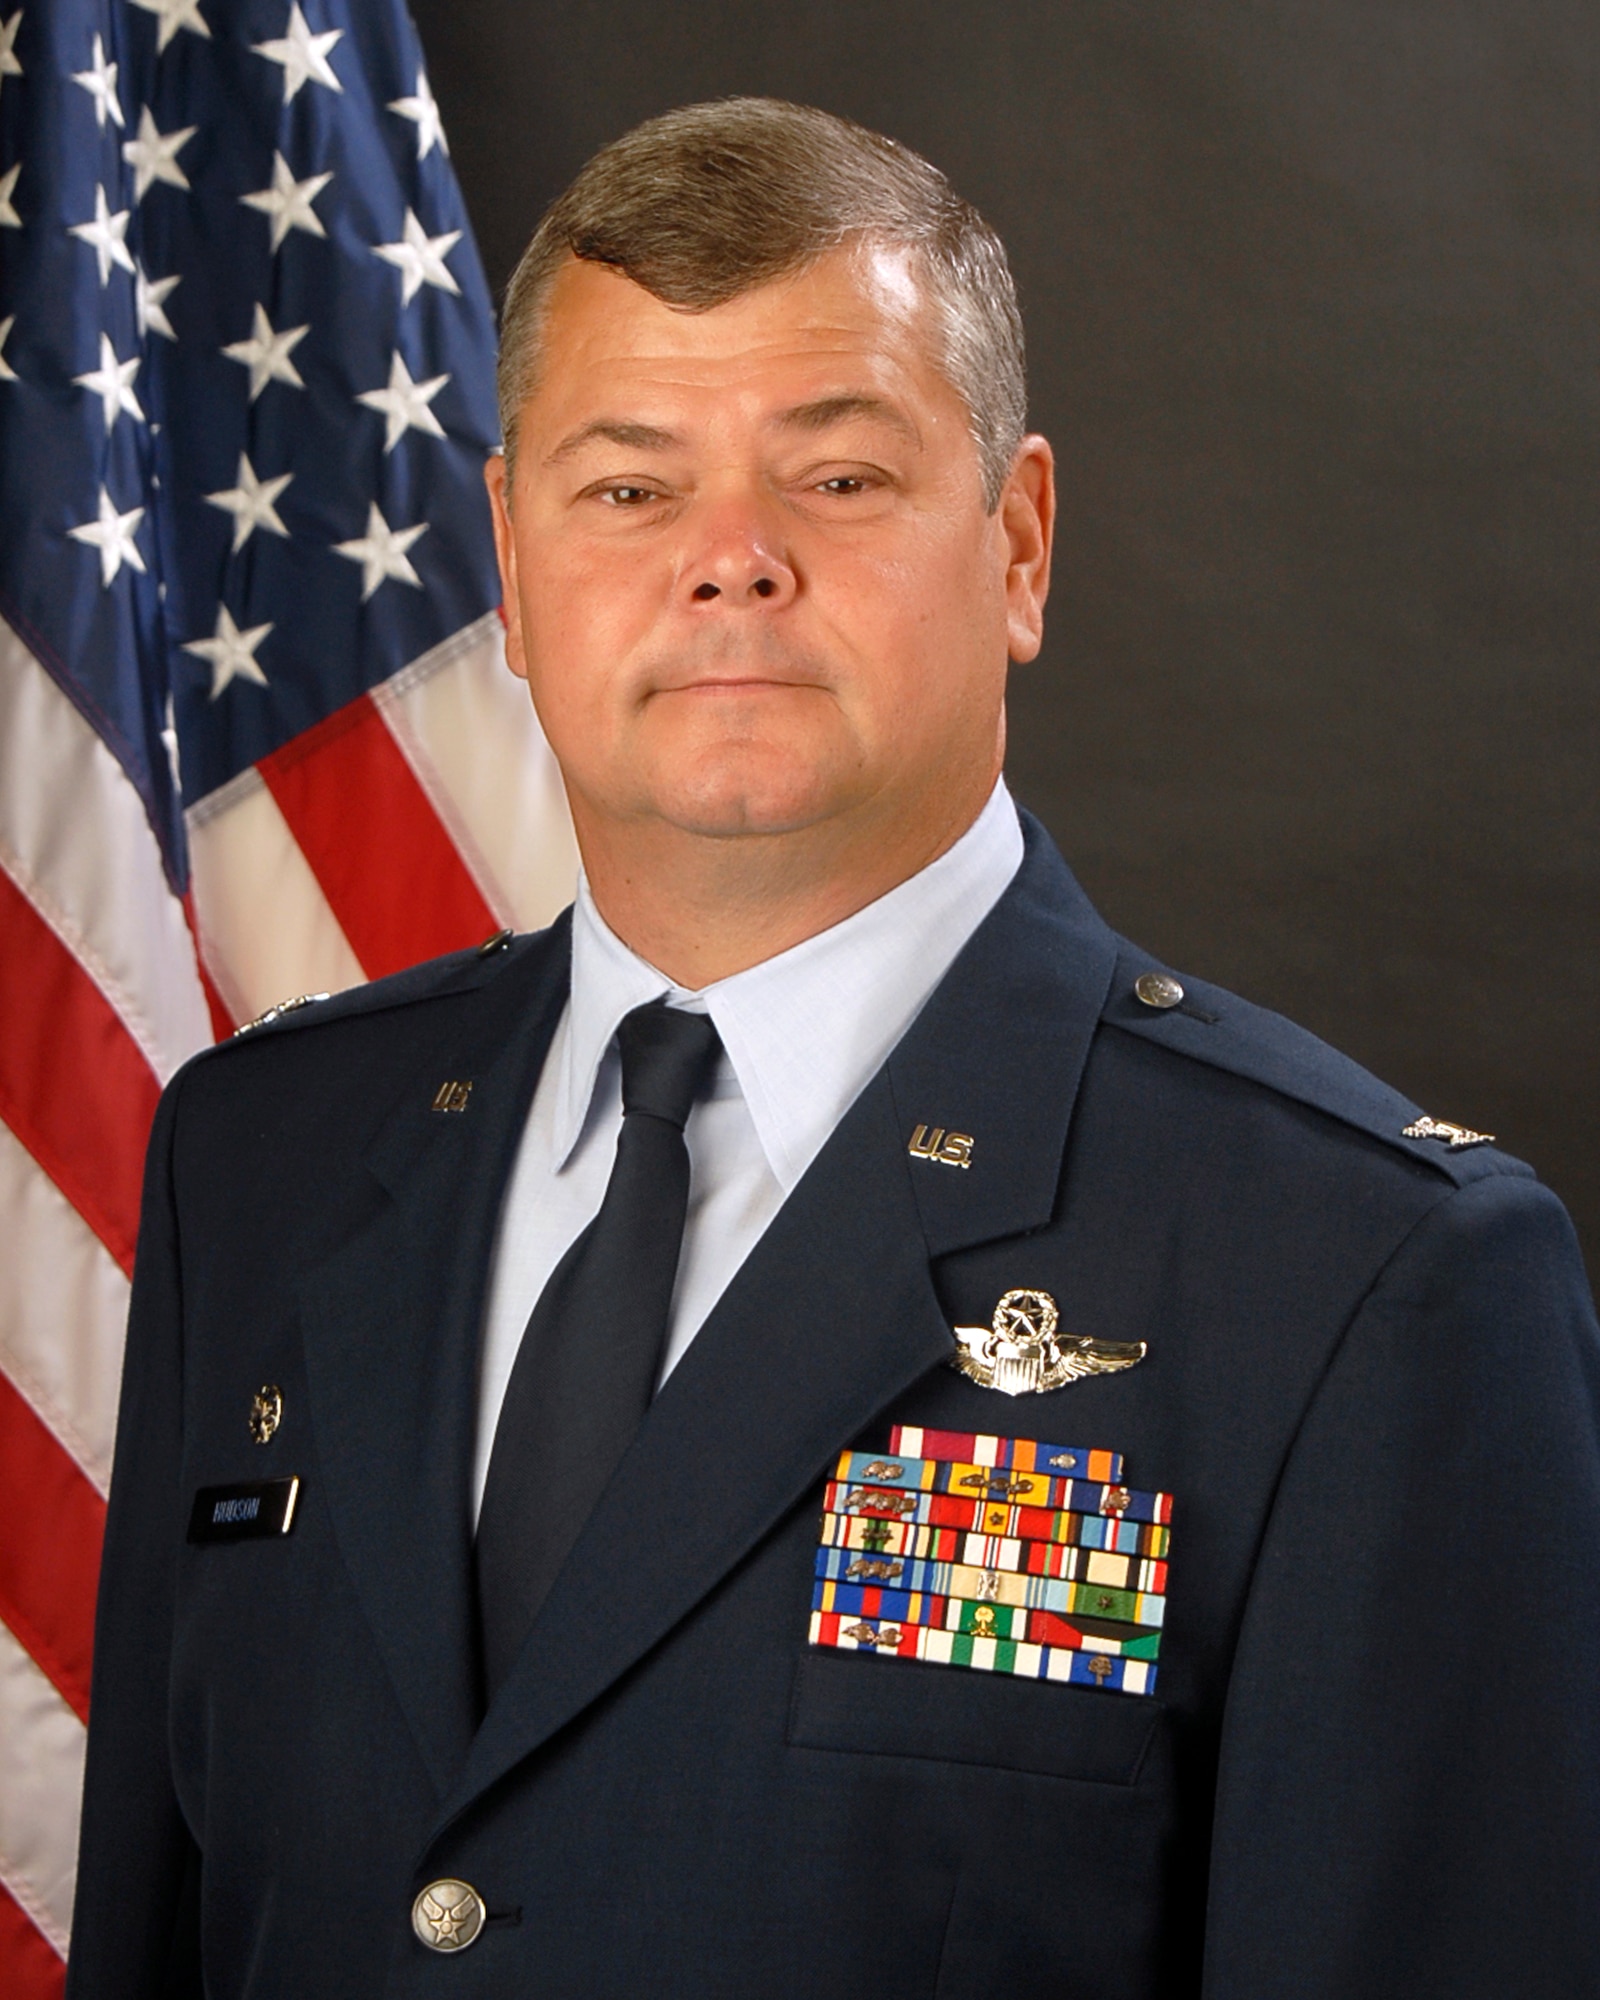 Col Michael Hudson, Commander of the 169th Fighter Wing, McEntire JNGB, S.C., poses for his official portrait on August 29, 2011. (Photo taken while Vice Commander, as of 7 January Col. Hudson is 169th FW Commander)
(SCANG photo by TSgt Caycee Cook)